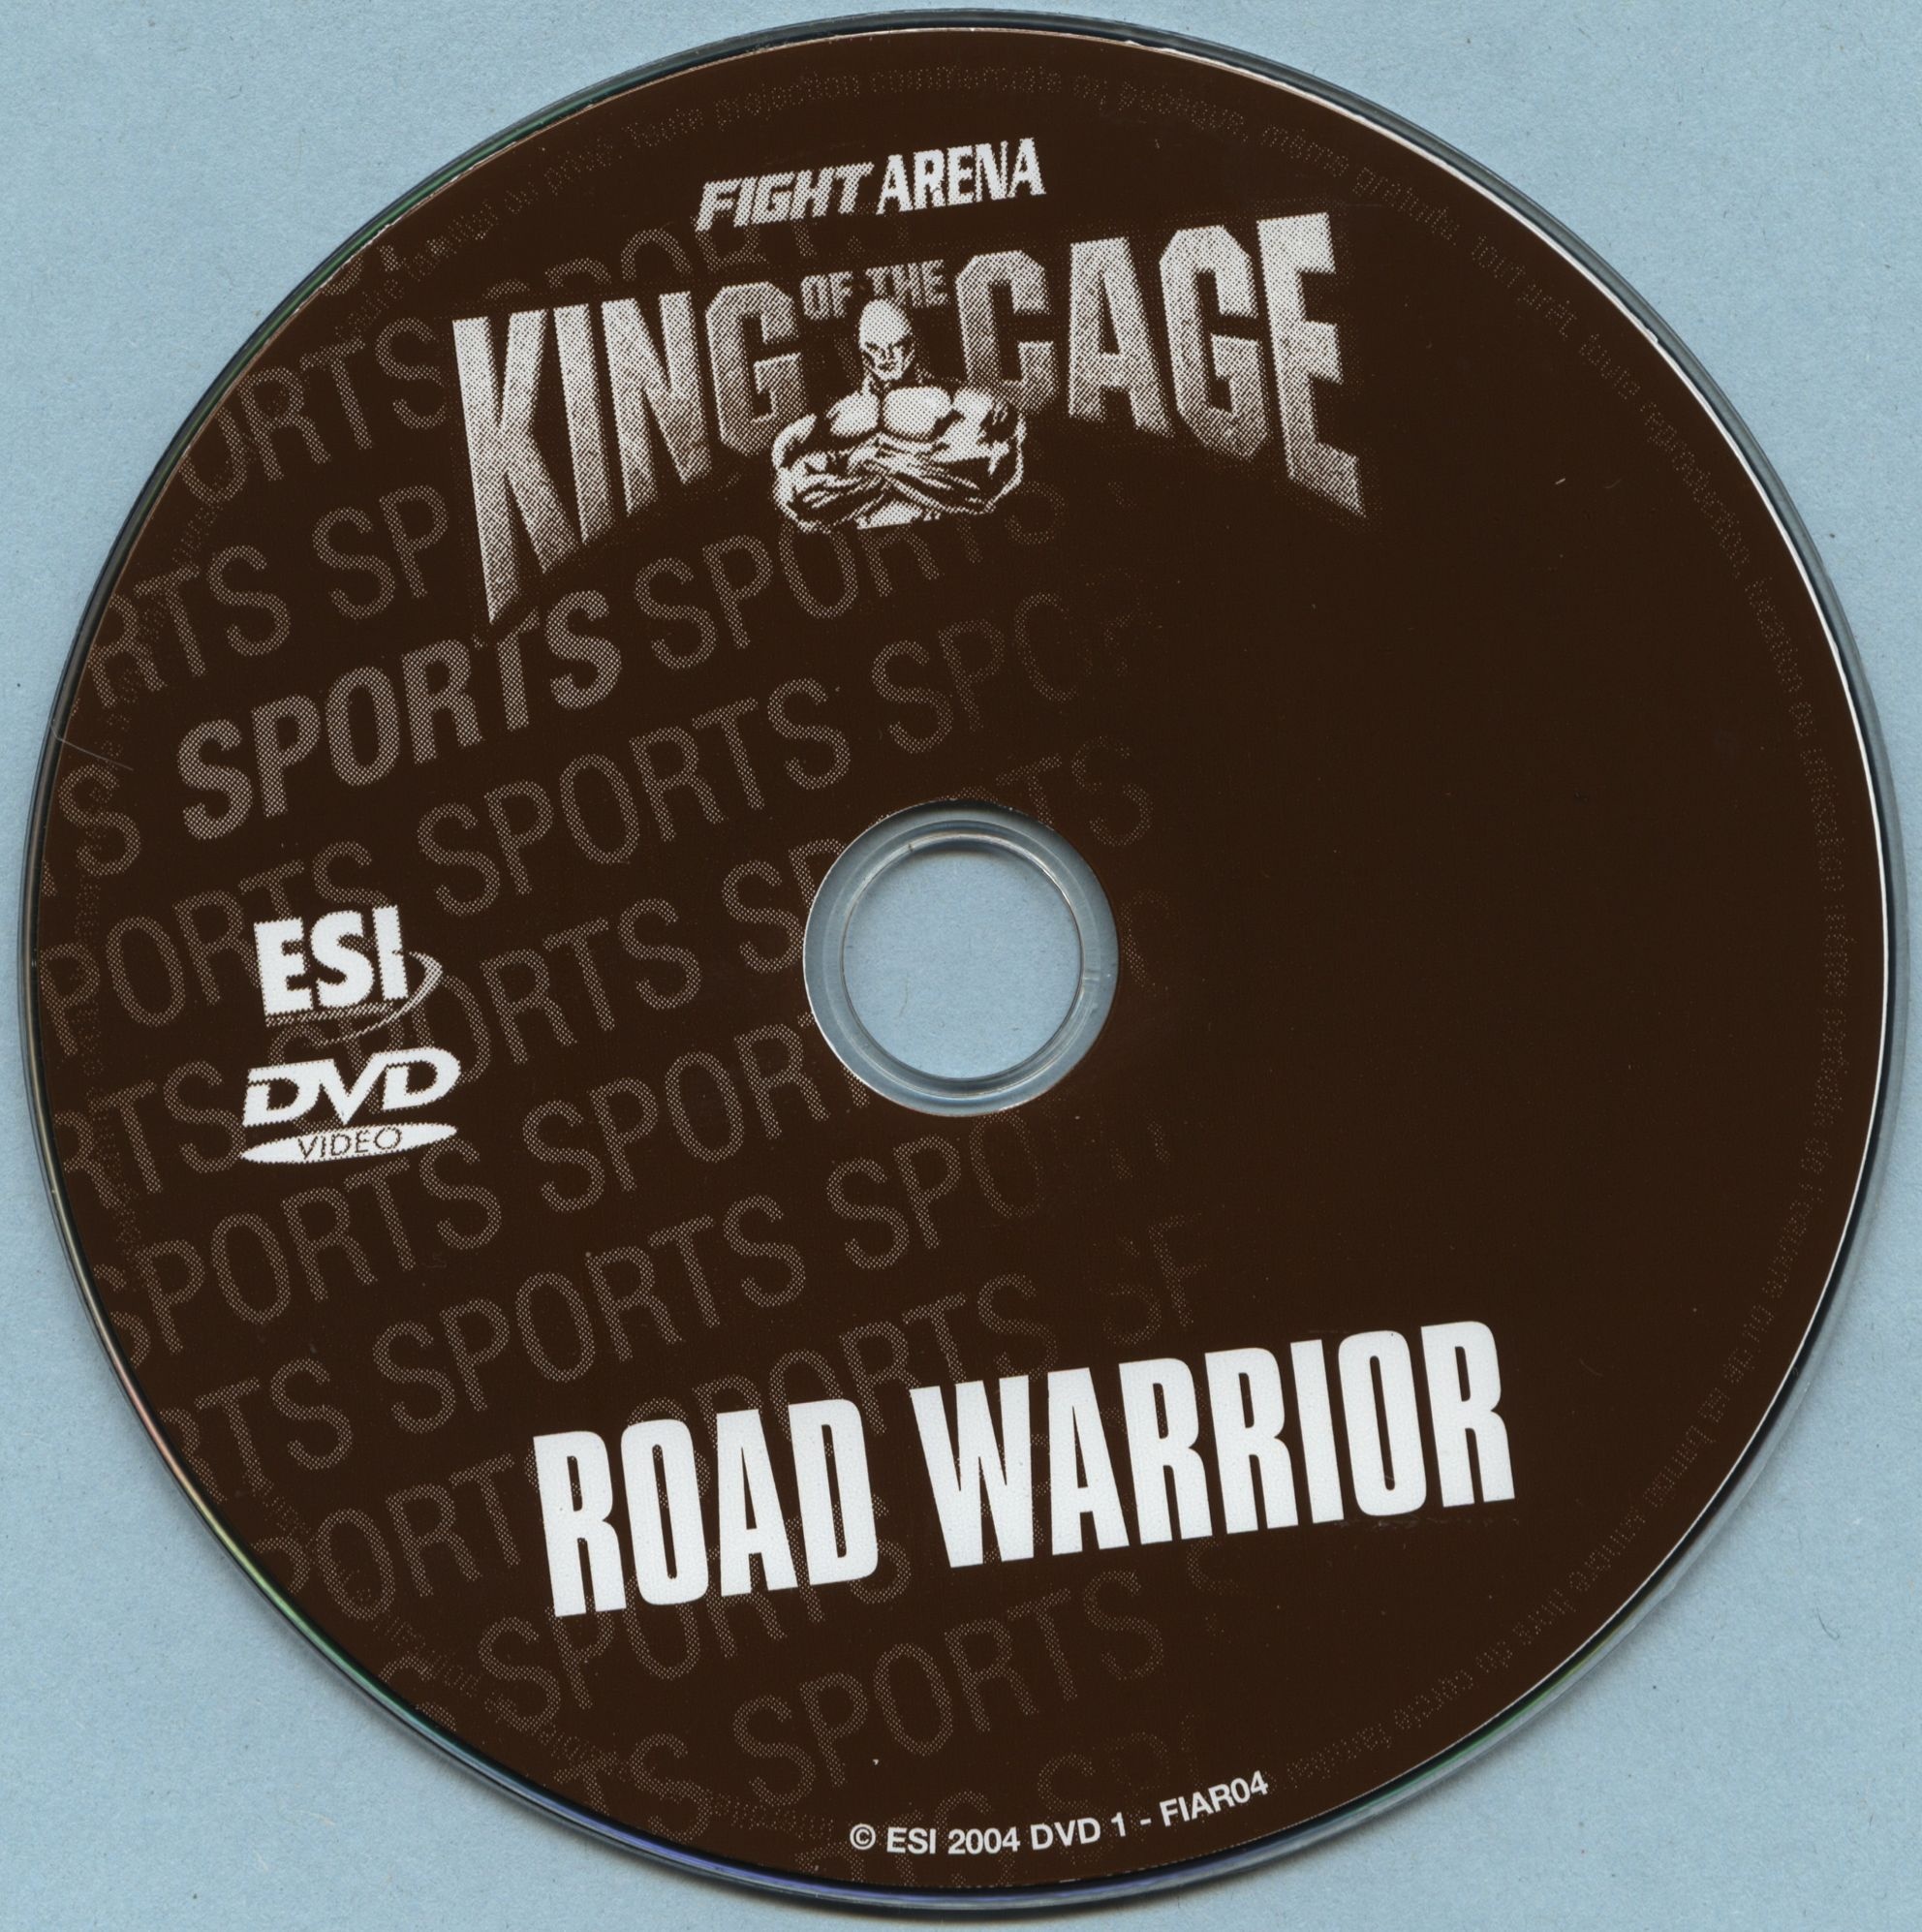 King of the cage road warrior